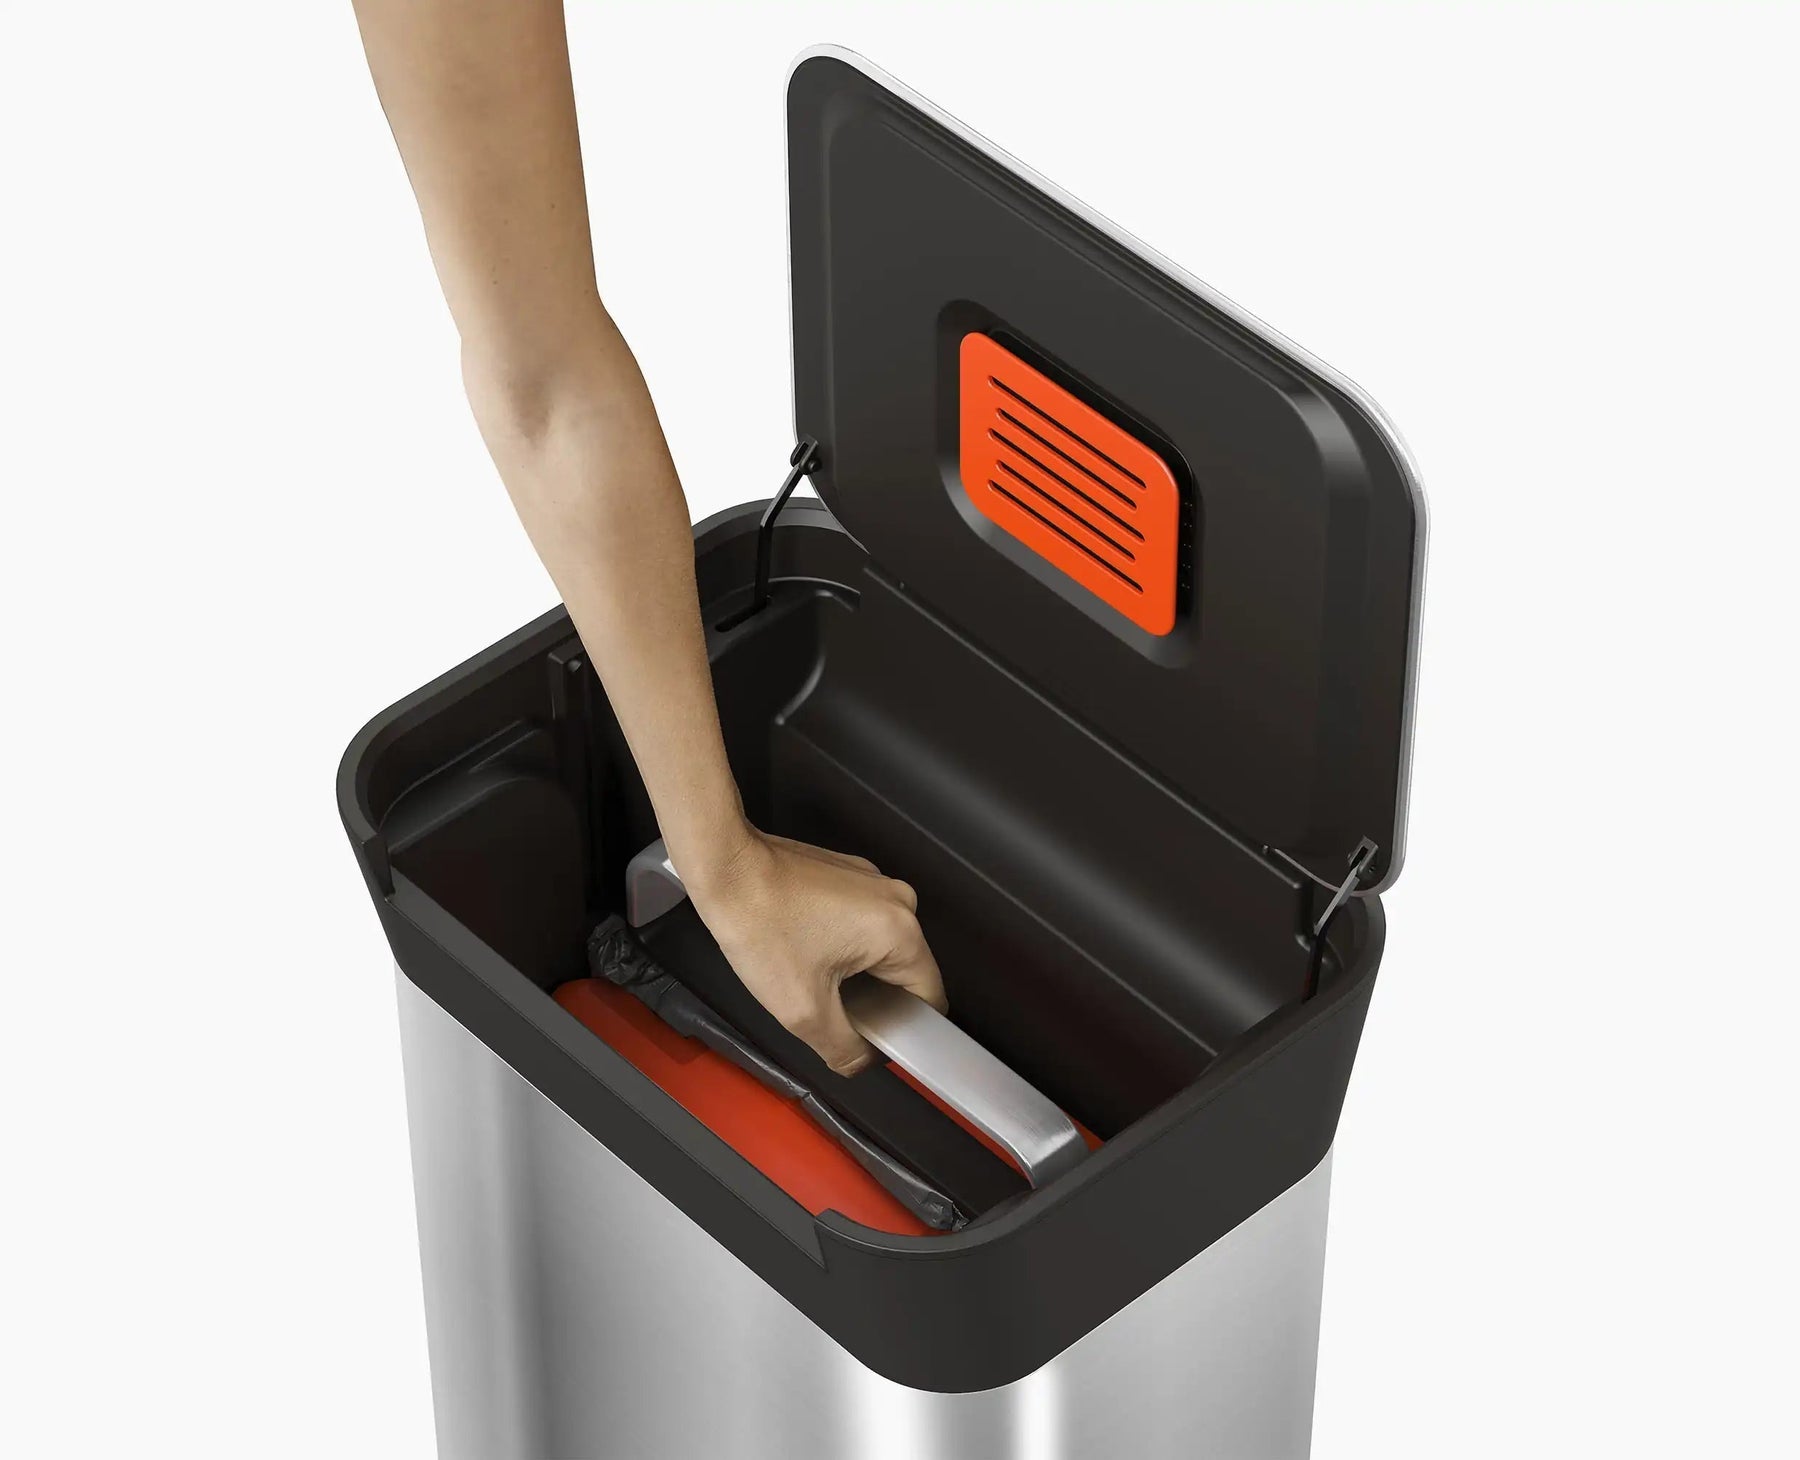 The most complete function of the smart recycling bin is here~